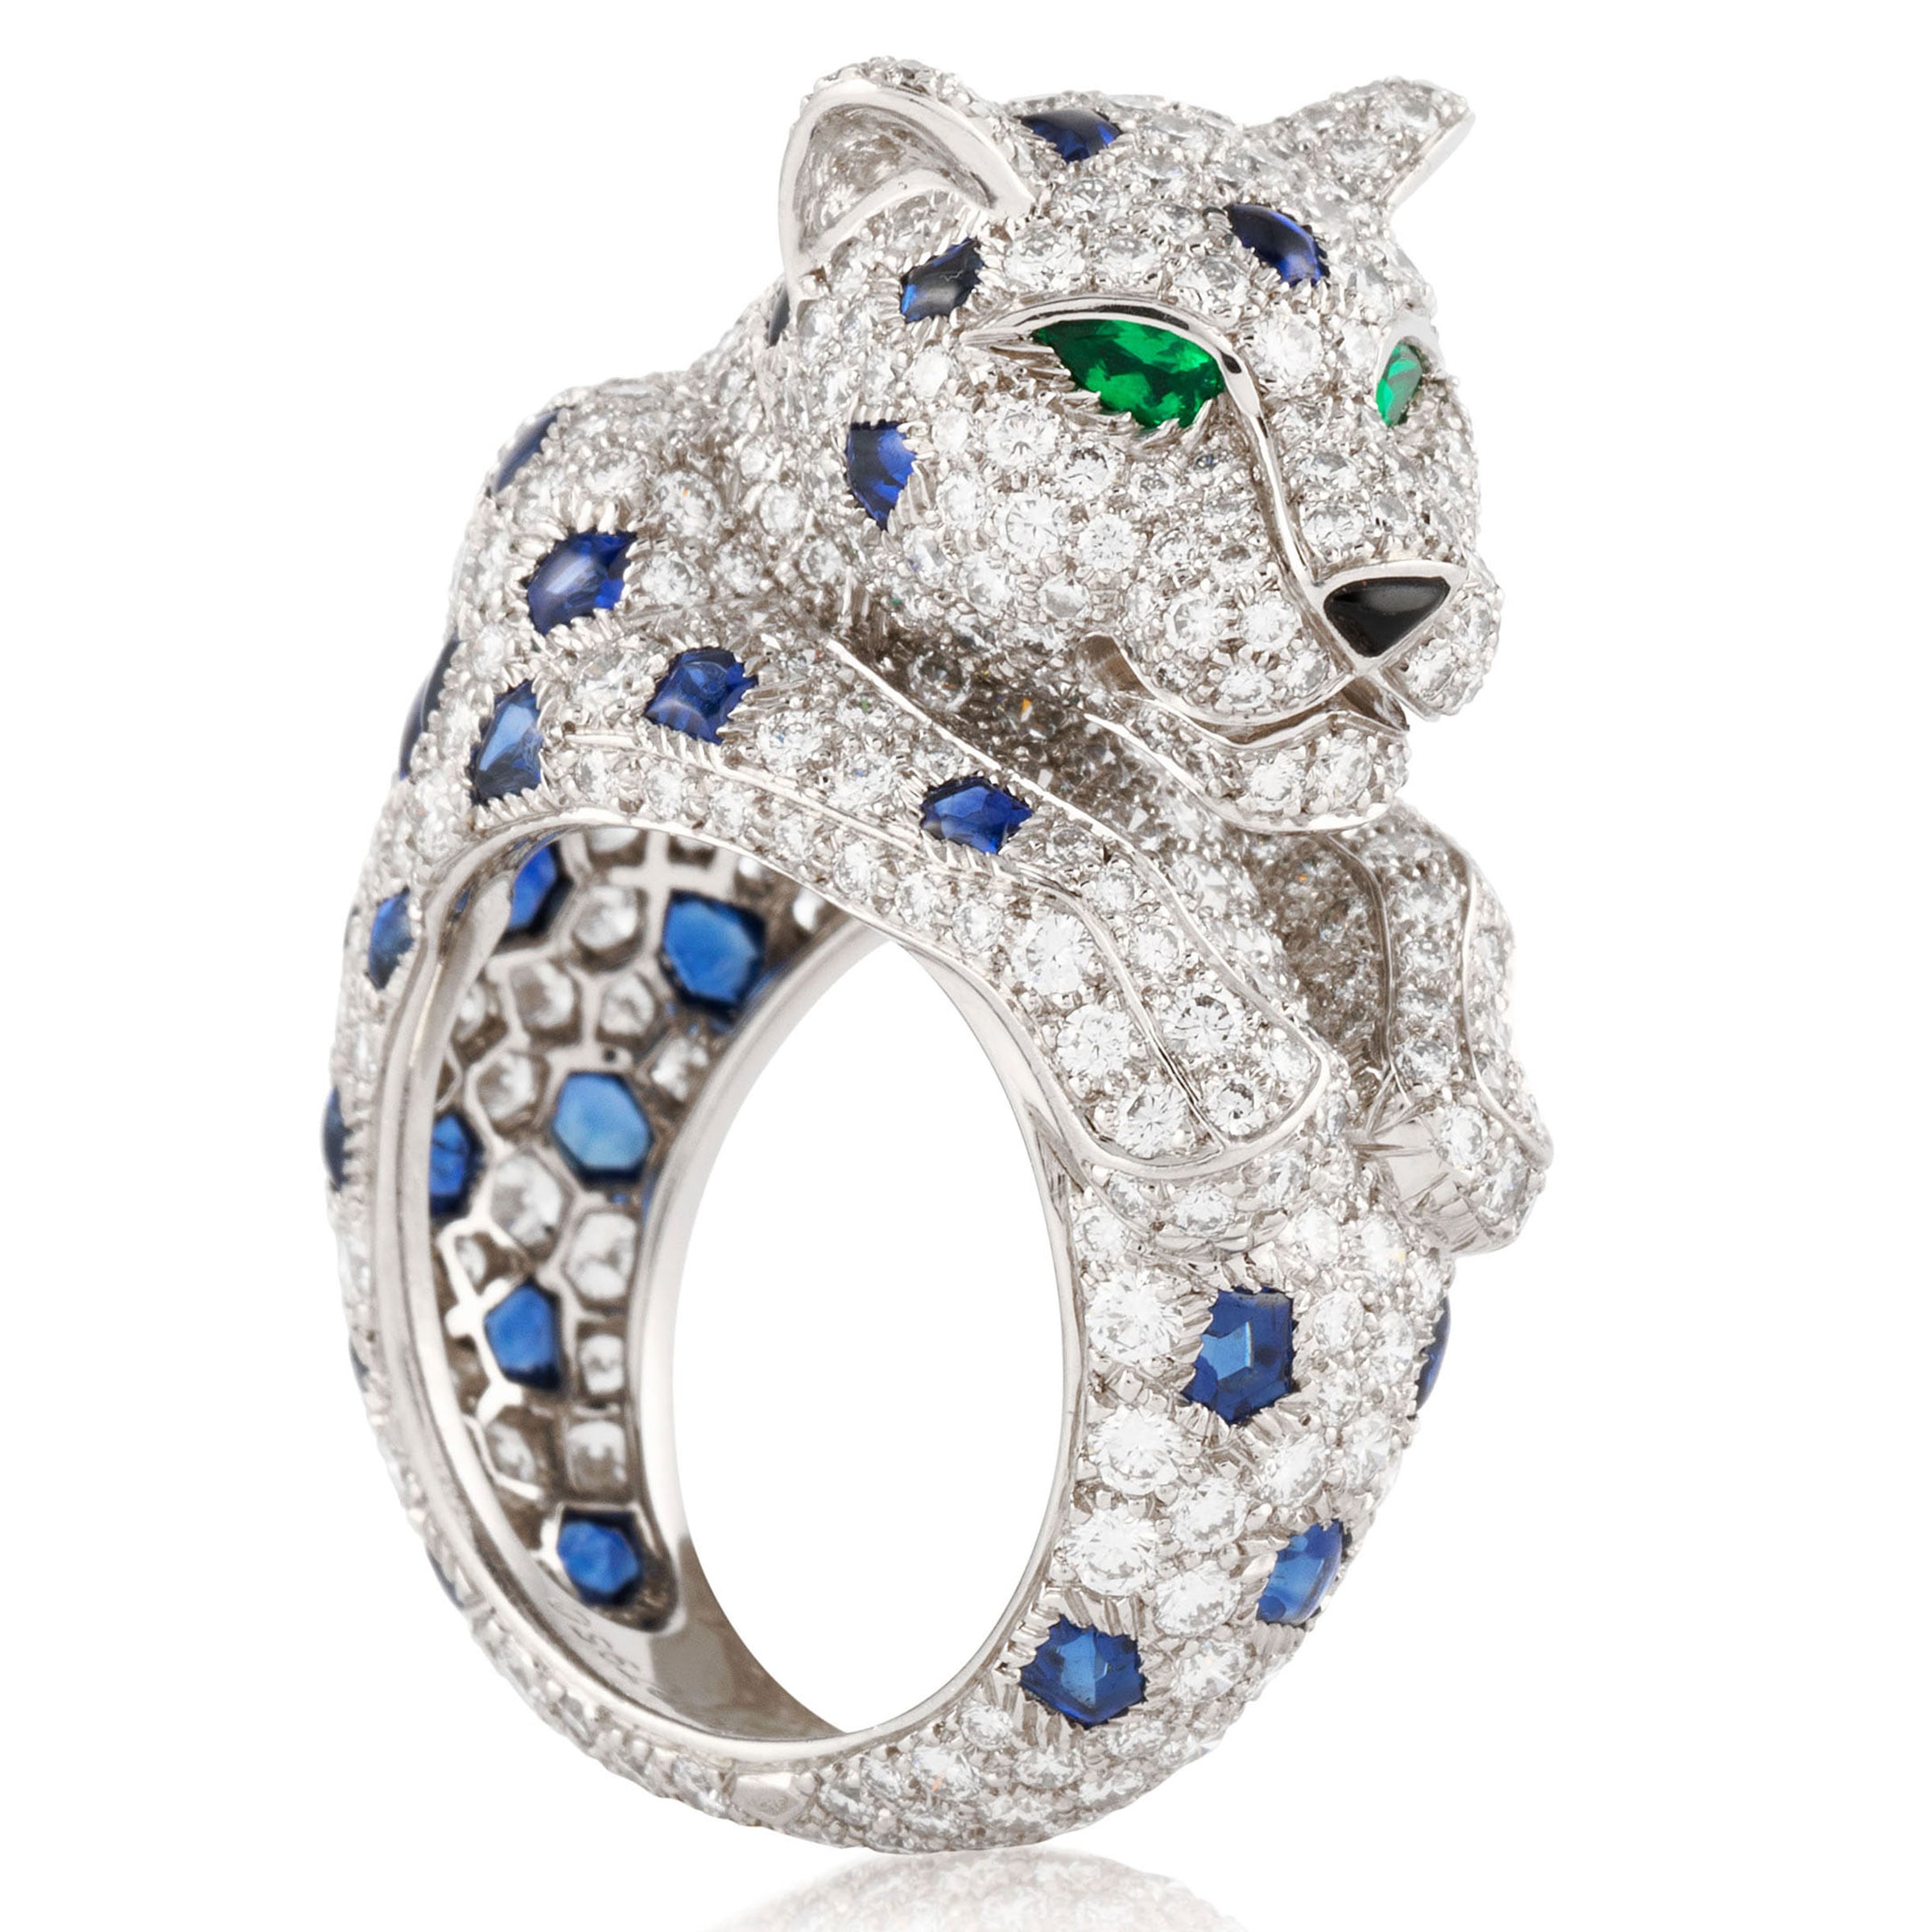 Cartier, Very Rare Iconic Sapphire, Emerald,… | Lot 172, Exclusive ...